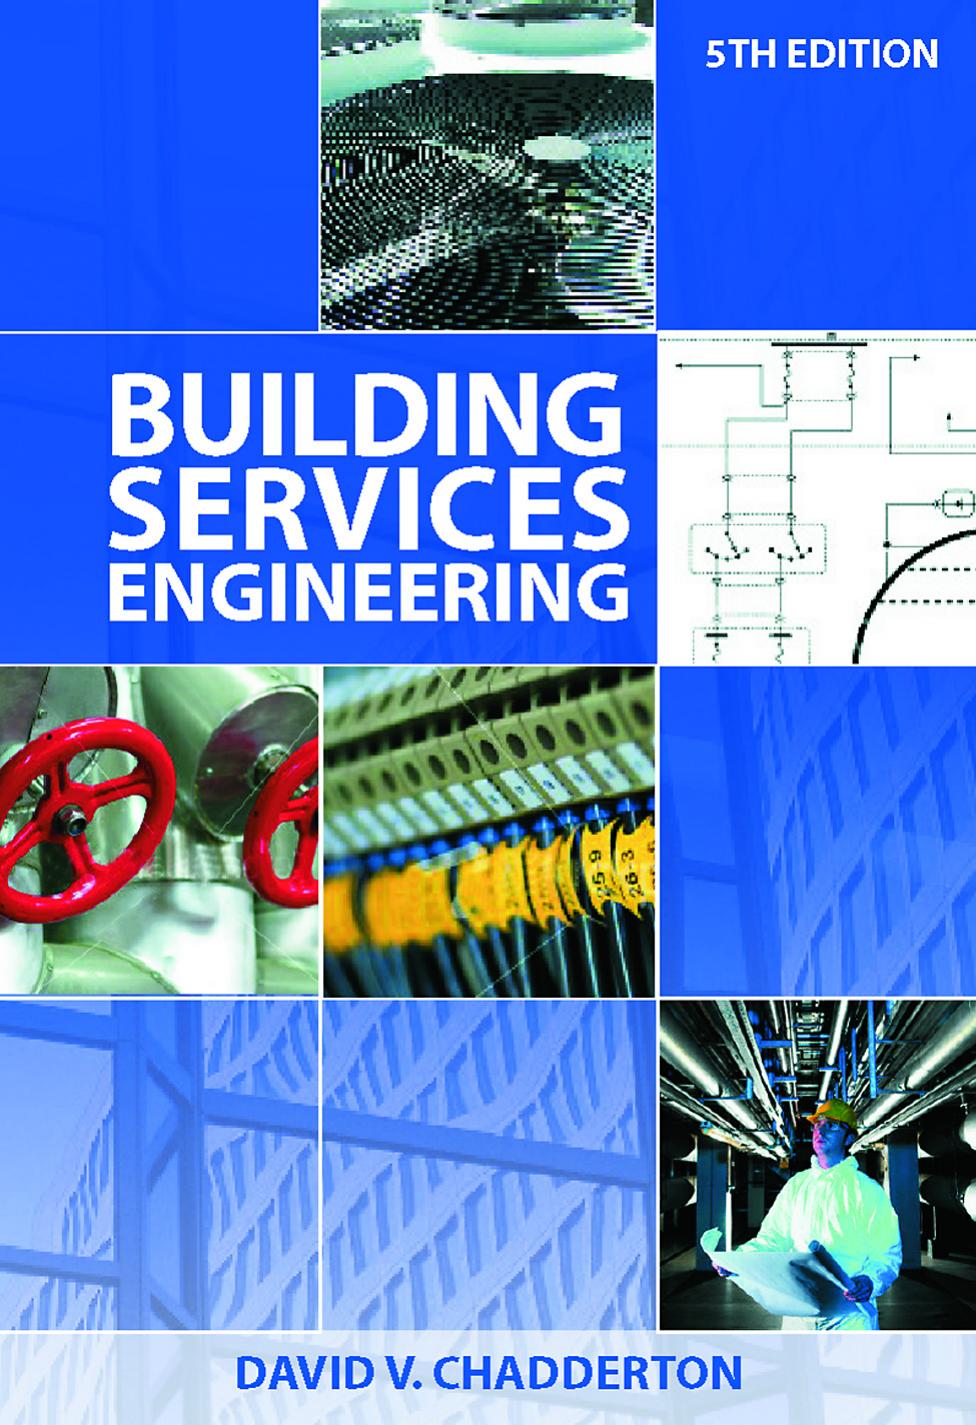 Building Services Engineering, Fifth Edition